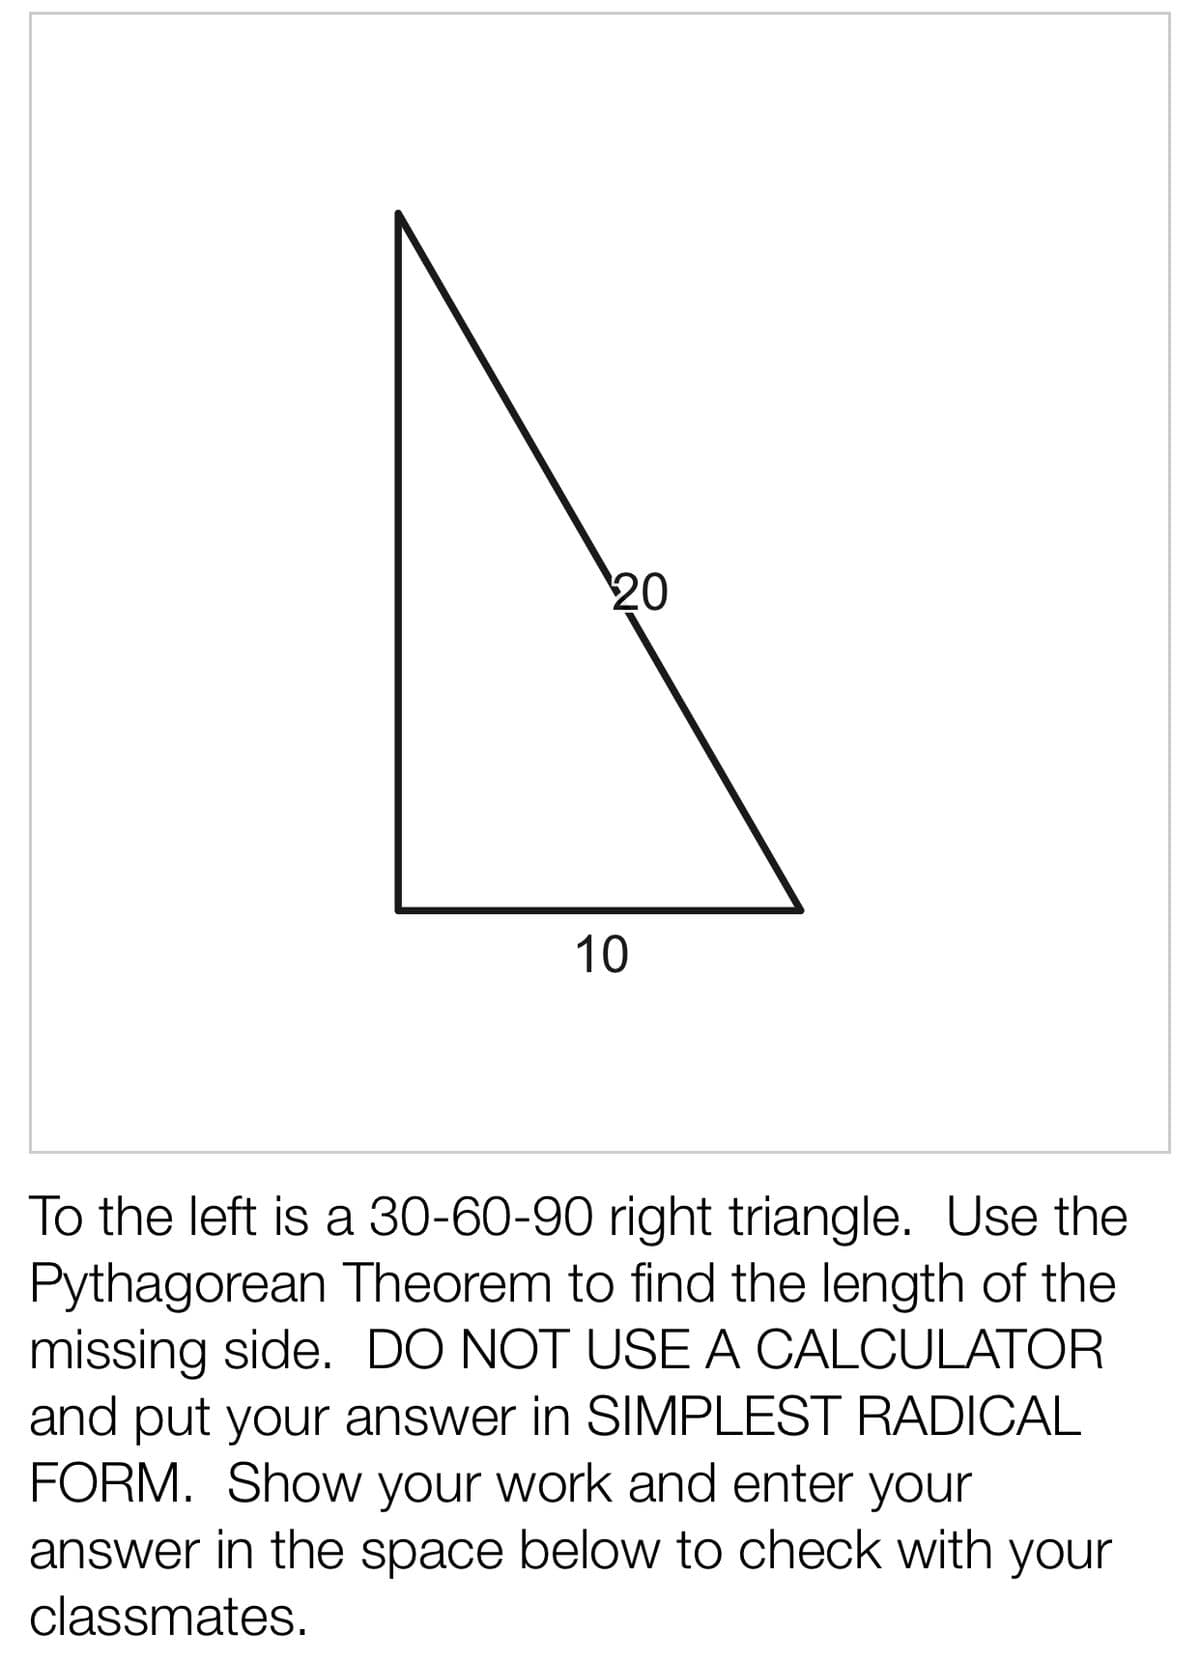 20
10
To the left is a 30-60-90 right triangle. Use the
Pythagorean Theorem to find the length of the
missing side. DO NOT USE A CALCULATOR
and put your answer in SIMPLEST RADICAL
FORM. Show your work and enter your
answer in the space below to check with your
classmates.
